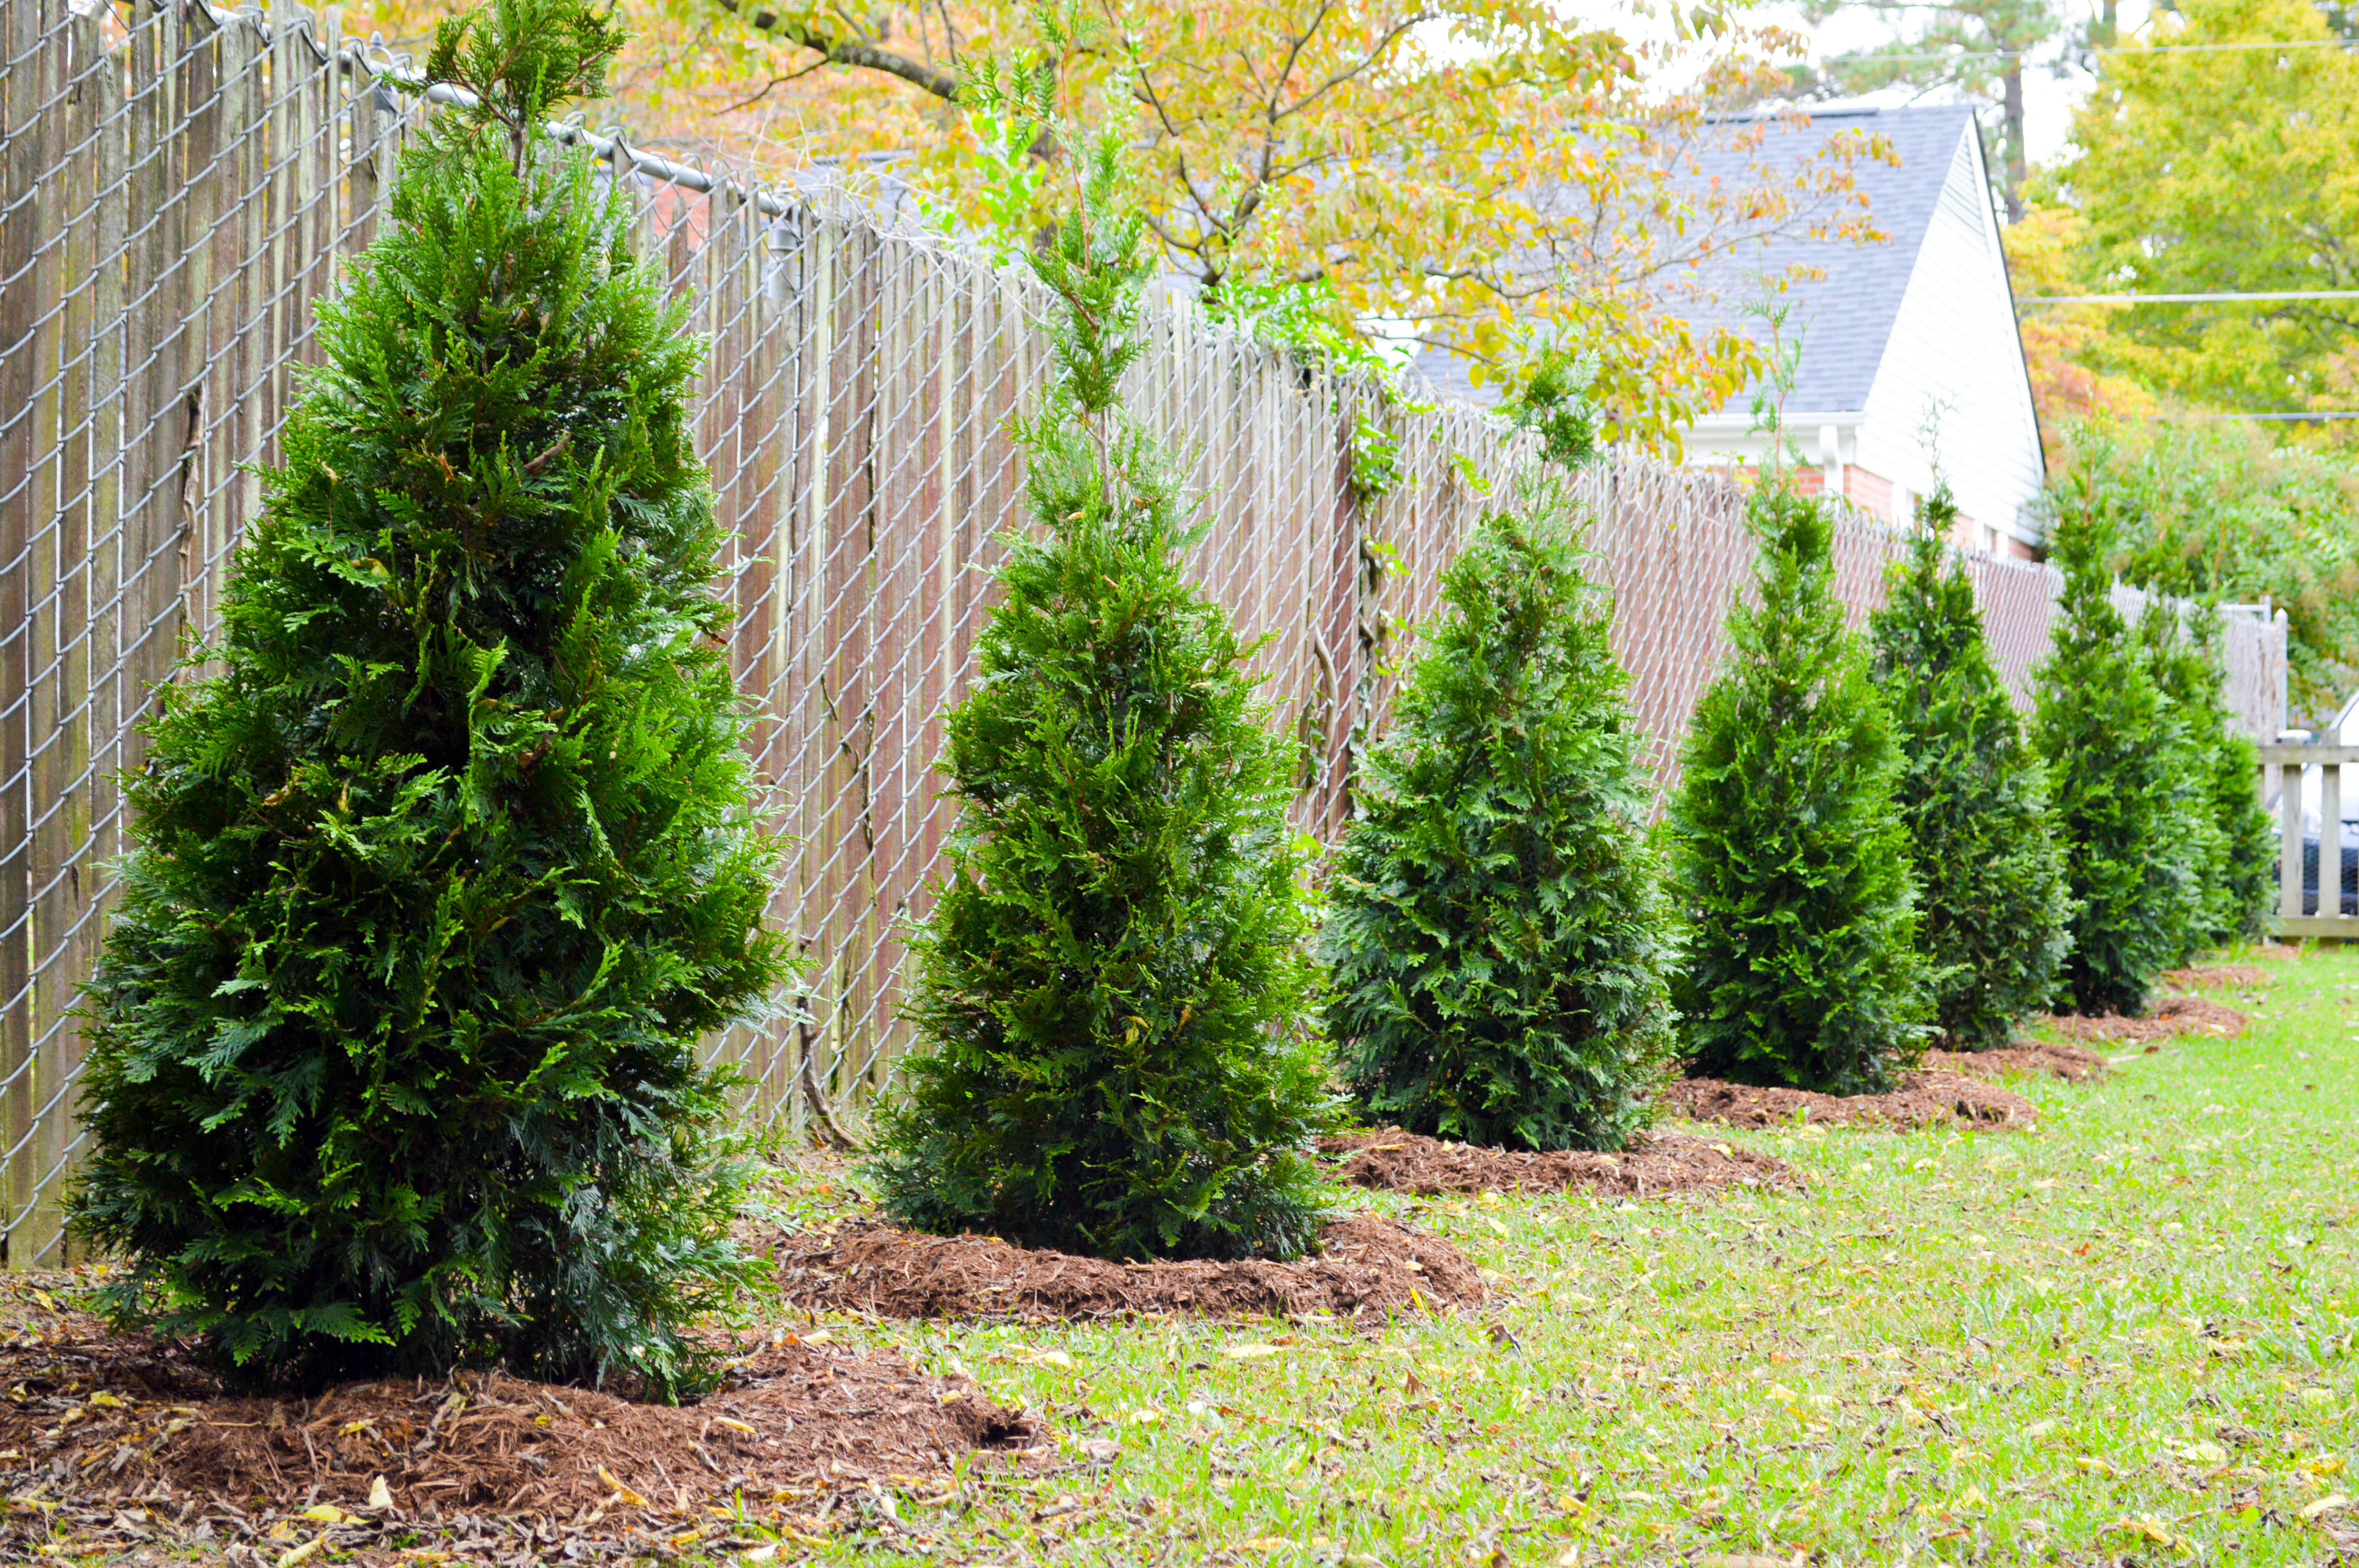 How Far to Plant Green Giant Arborvitae from Fence? 